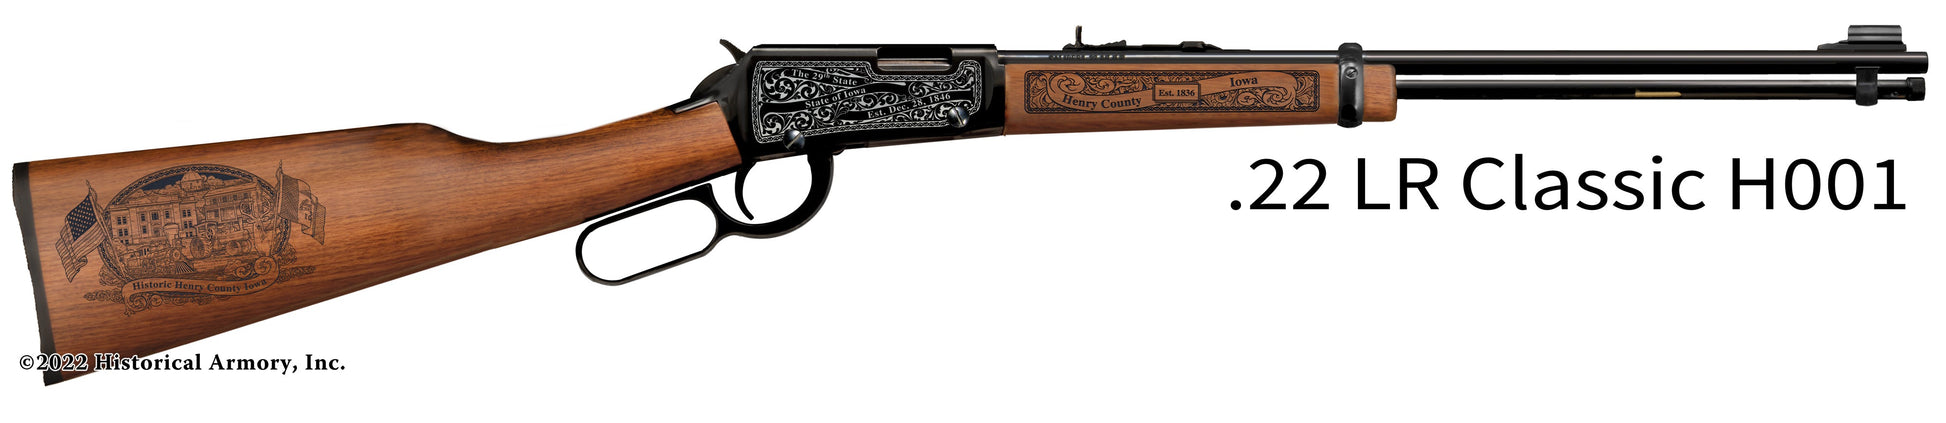 Henry County Iowa Engraved Henry H001 Rifle